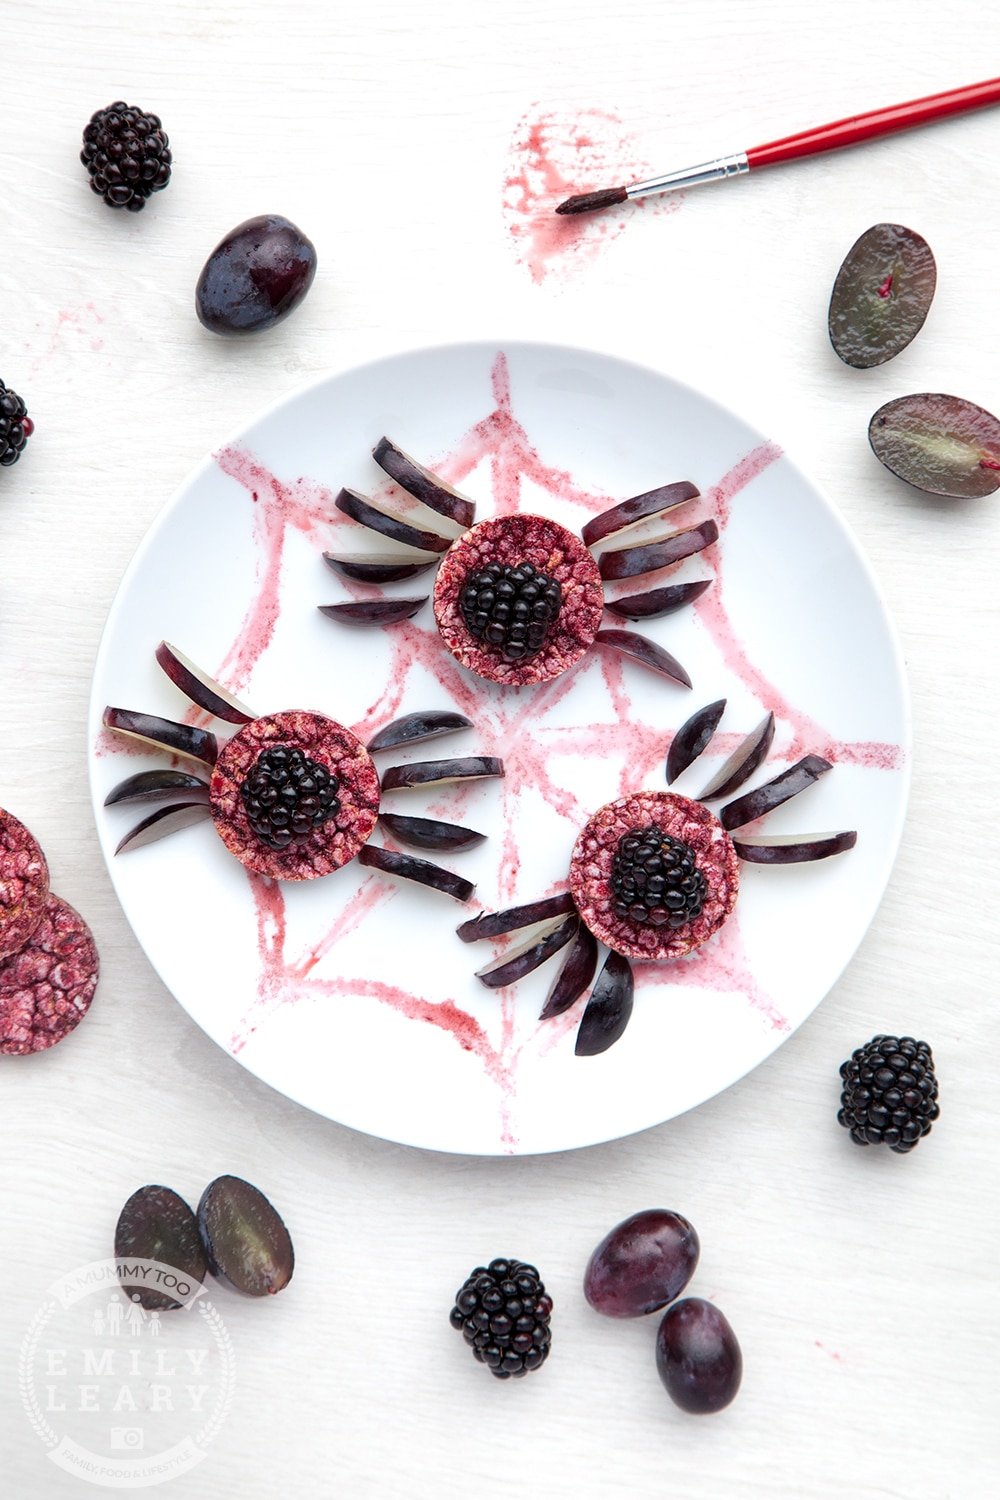 Small purple rice cakes decorated with fruit to look like spiders.